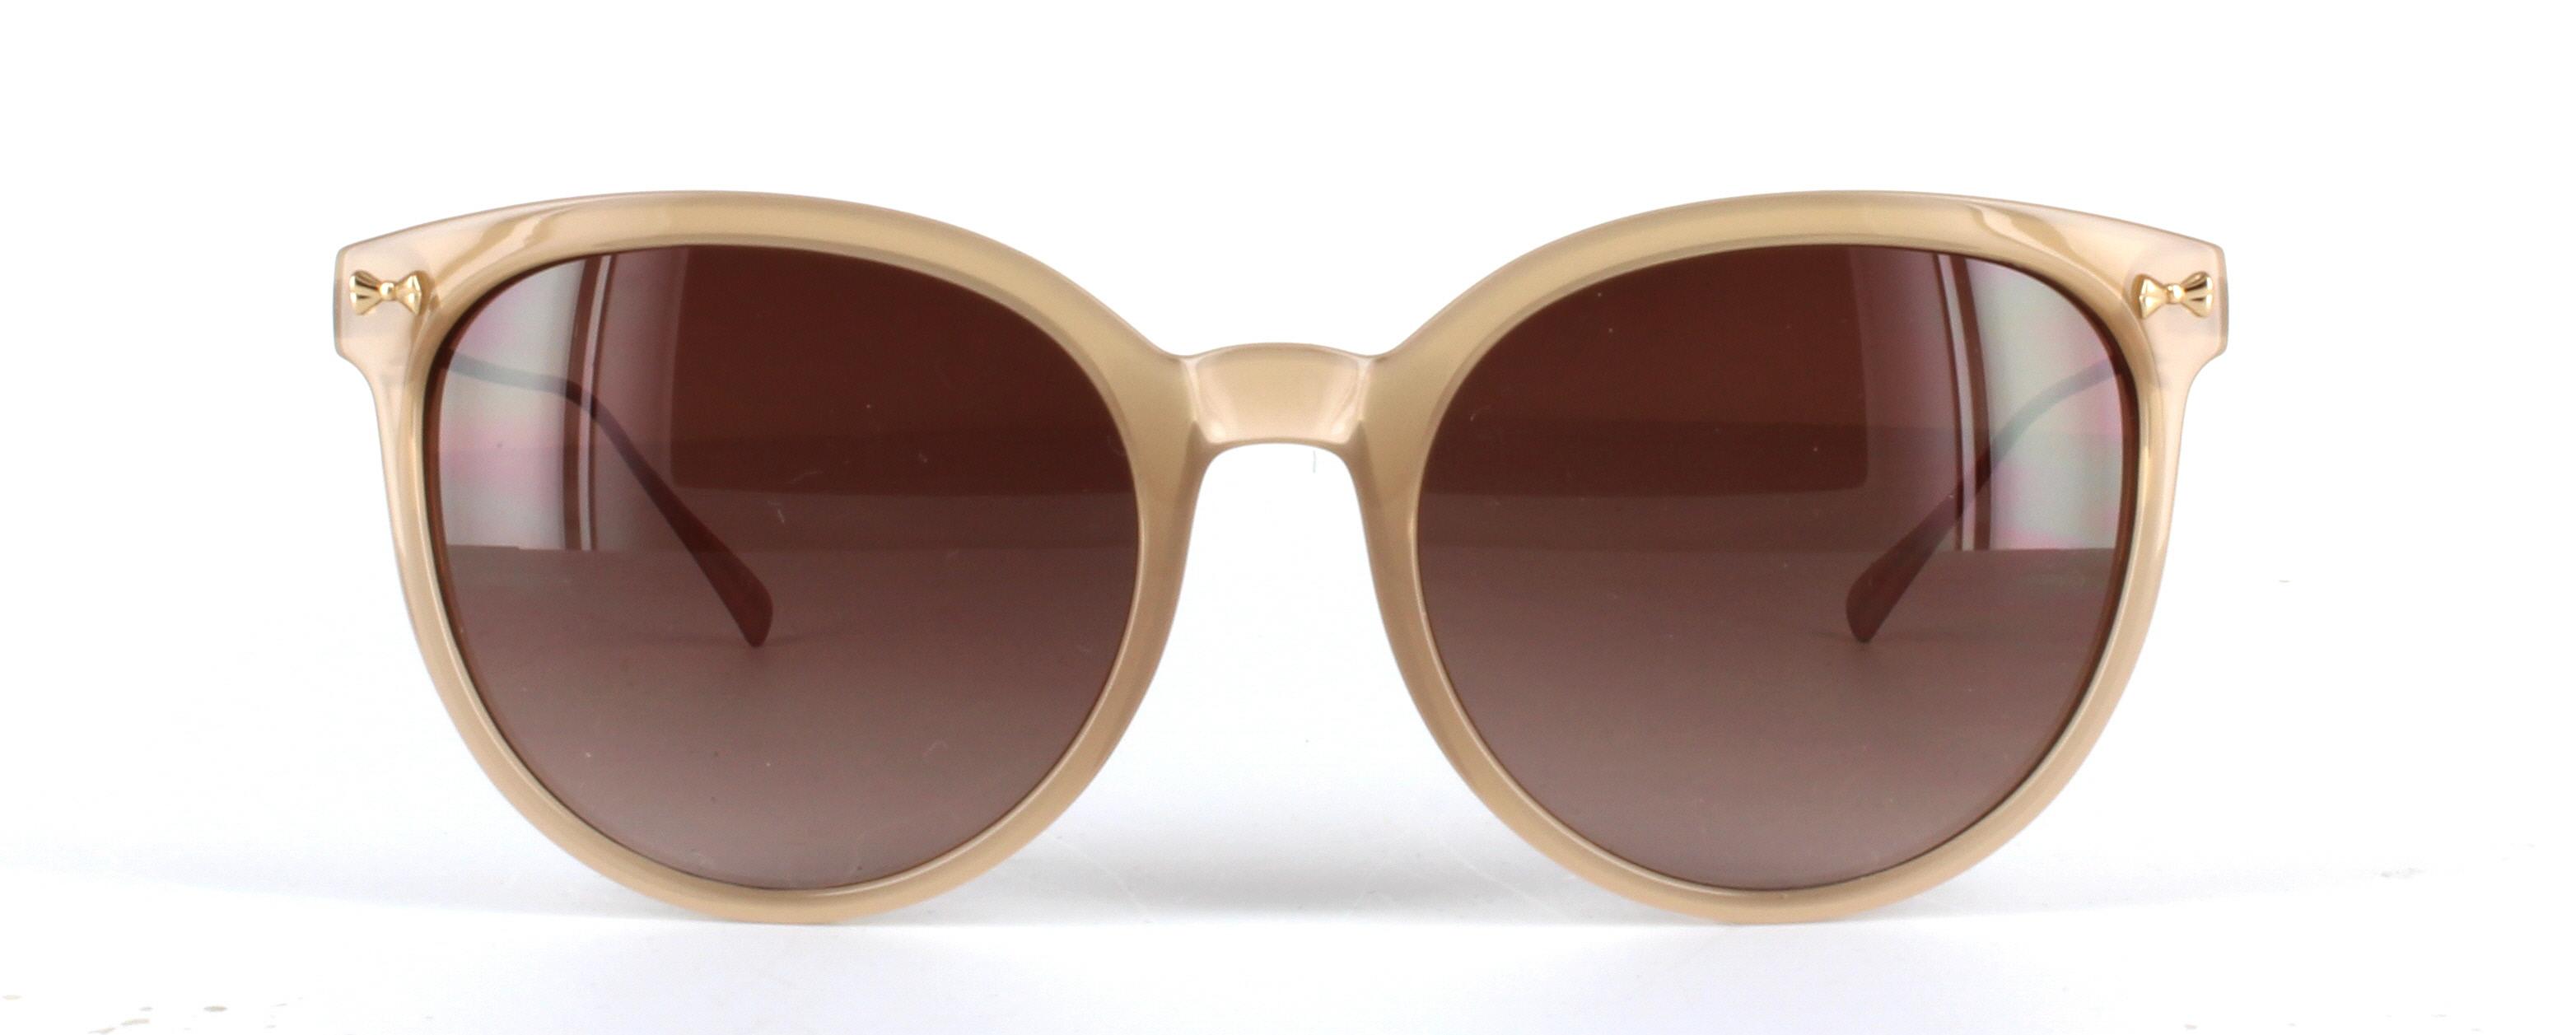 Maren Clear Brown | Glasses Online | Glasses2You